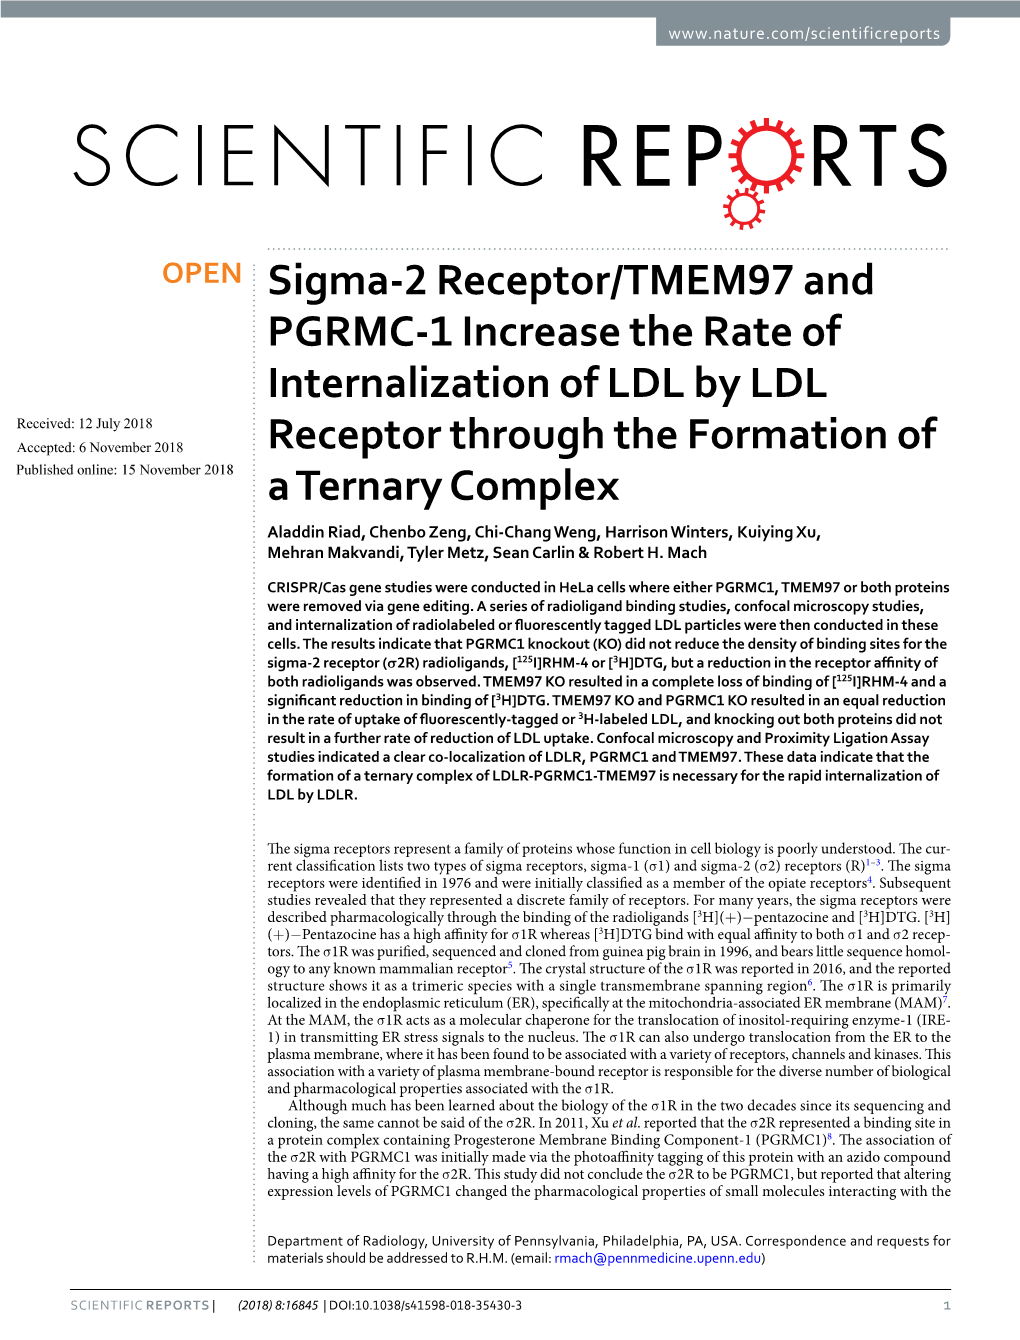 Sigma-2 Receptor/TMEM97 and PGRMC-1 Increase the Rate Of